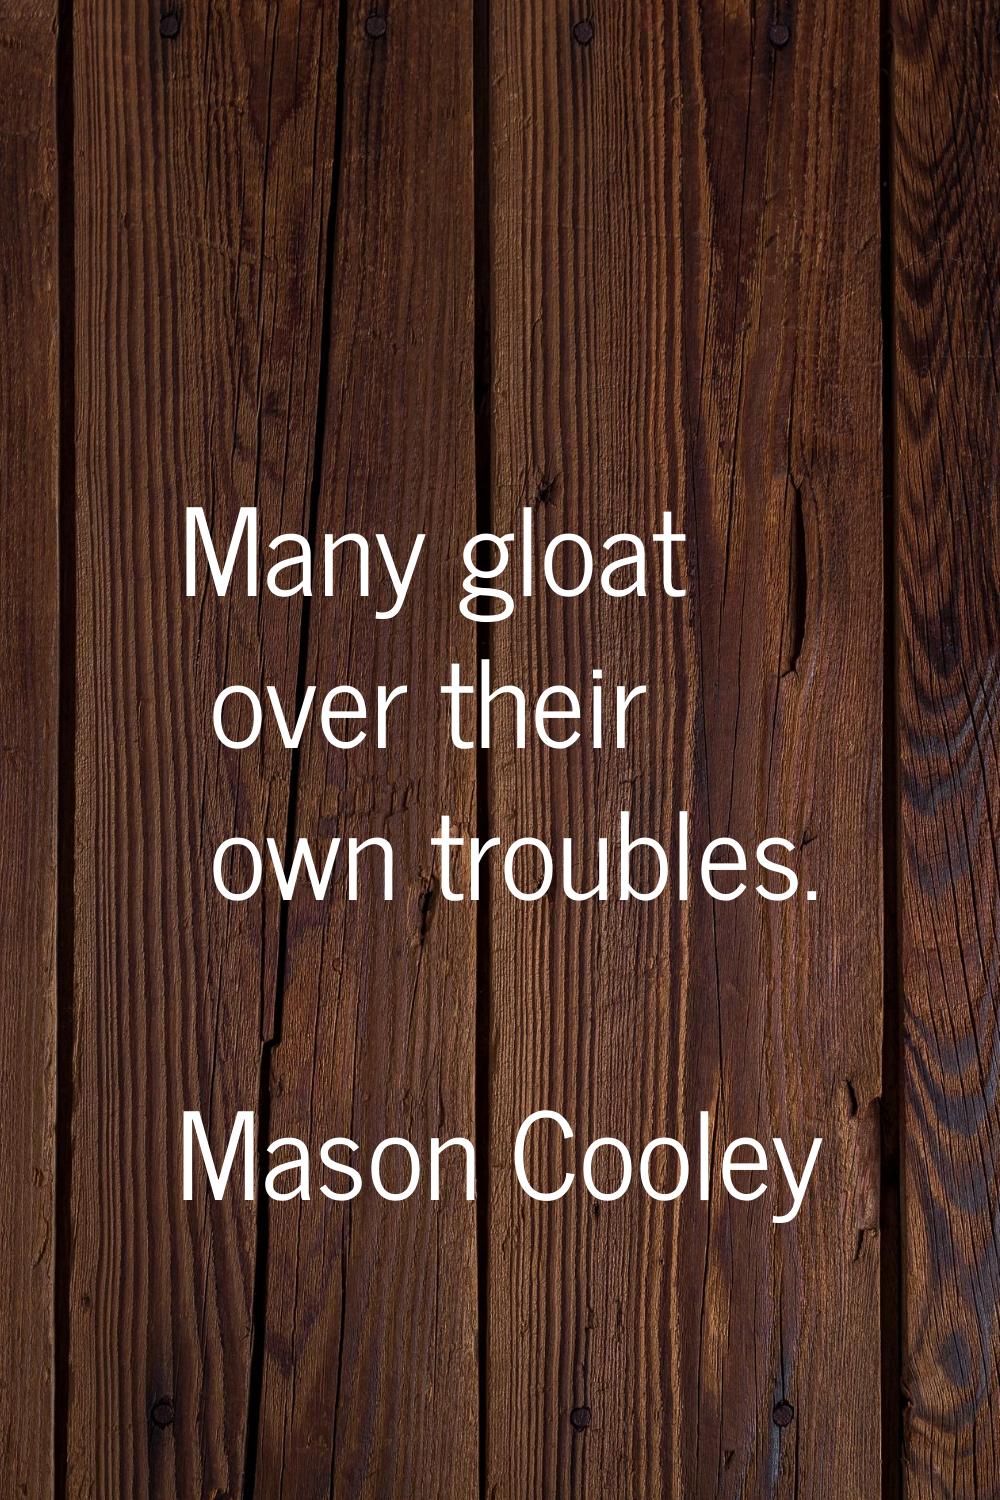 Many gloat over their own troubles.